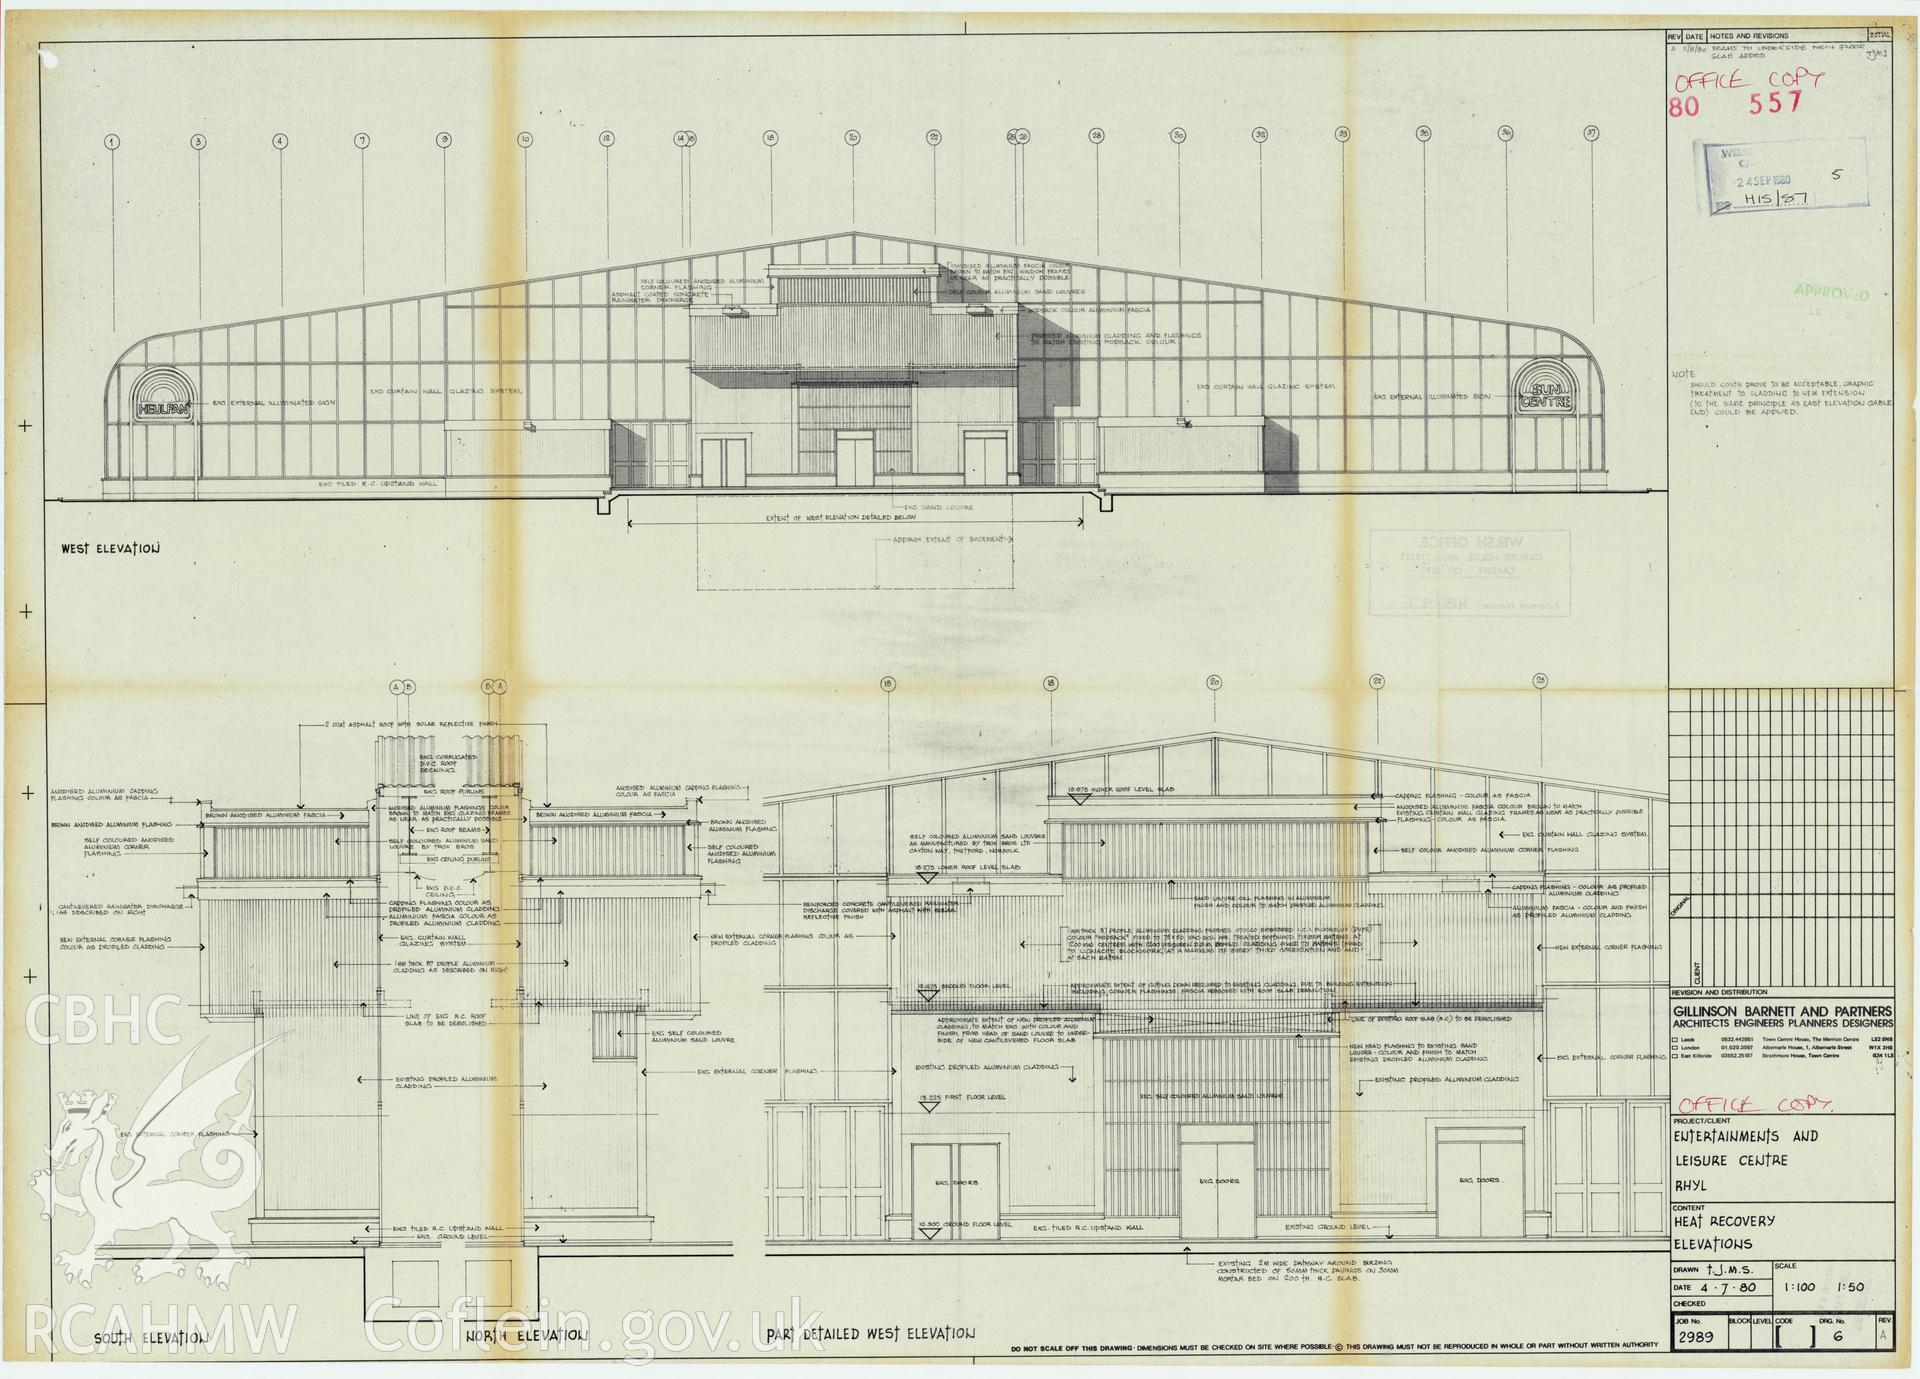 Digital copy of a measured drawing showing heat recovery elevations of the entertainment complex at Rhyl Sun Centre and Theatre, produced by Gillinson Barnett & Partners  1980. Loaned for copying by Denbighshire County Council.